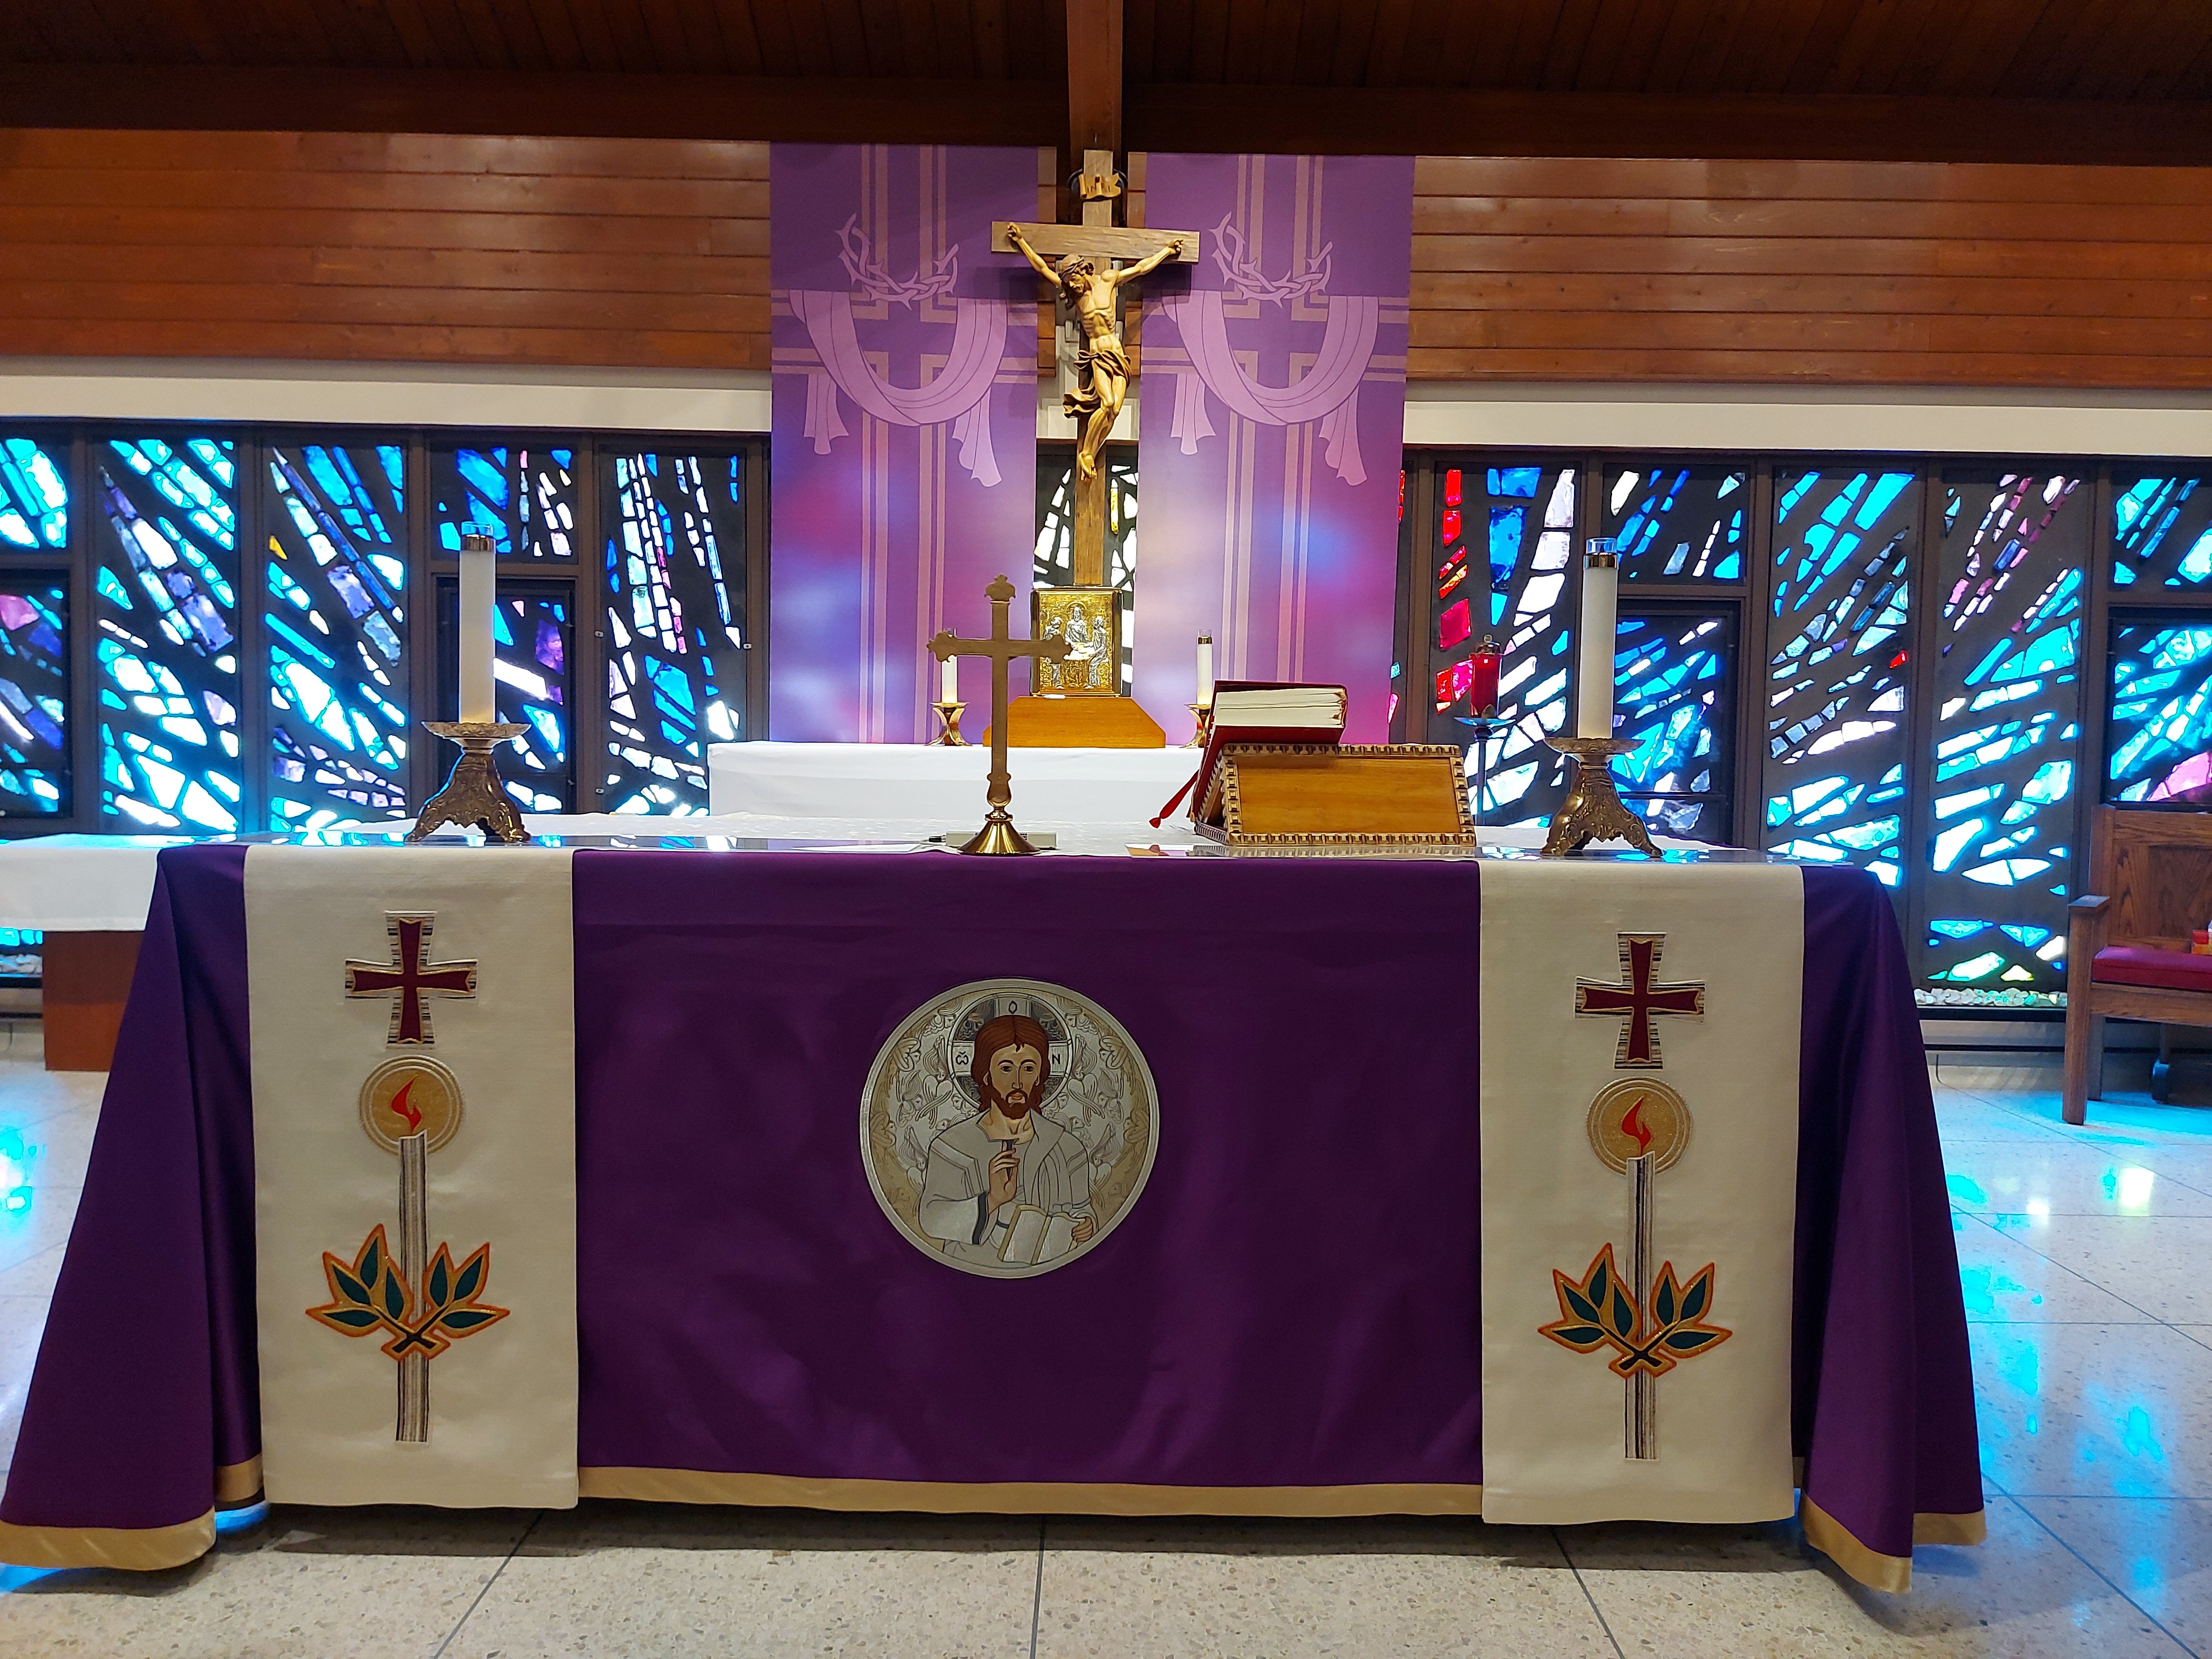 Image taken of the Altar Table and Tabernacle in the Sanctuary during the Lenten Season